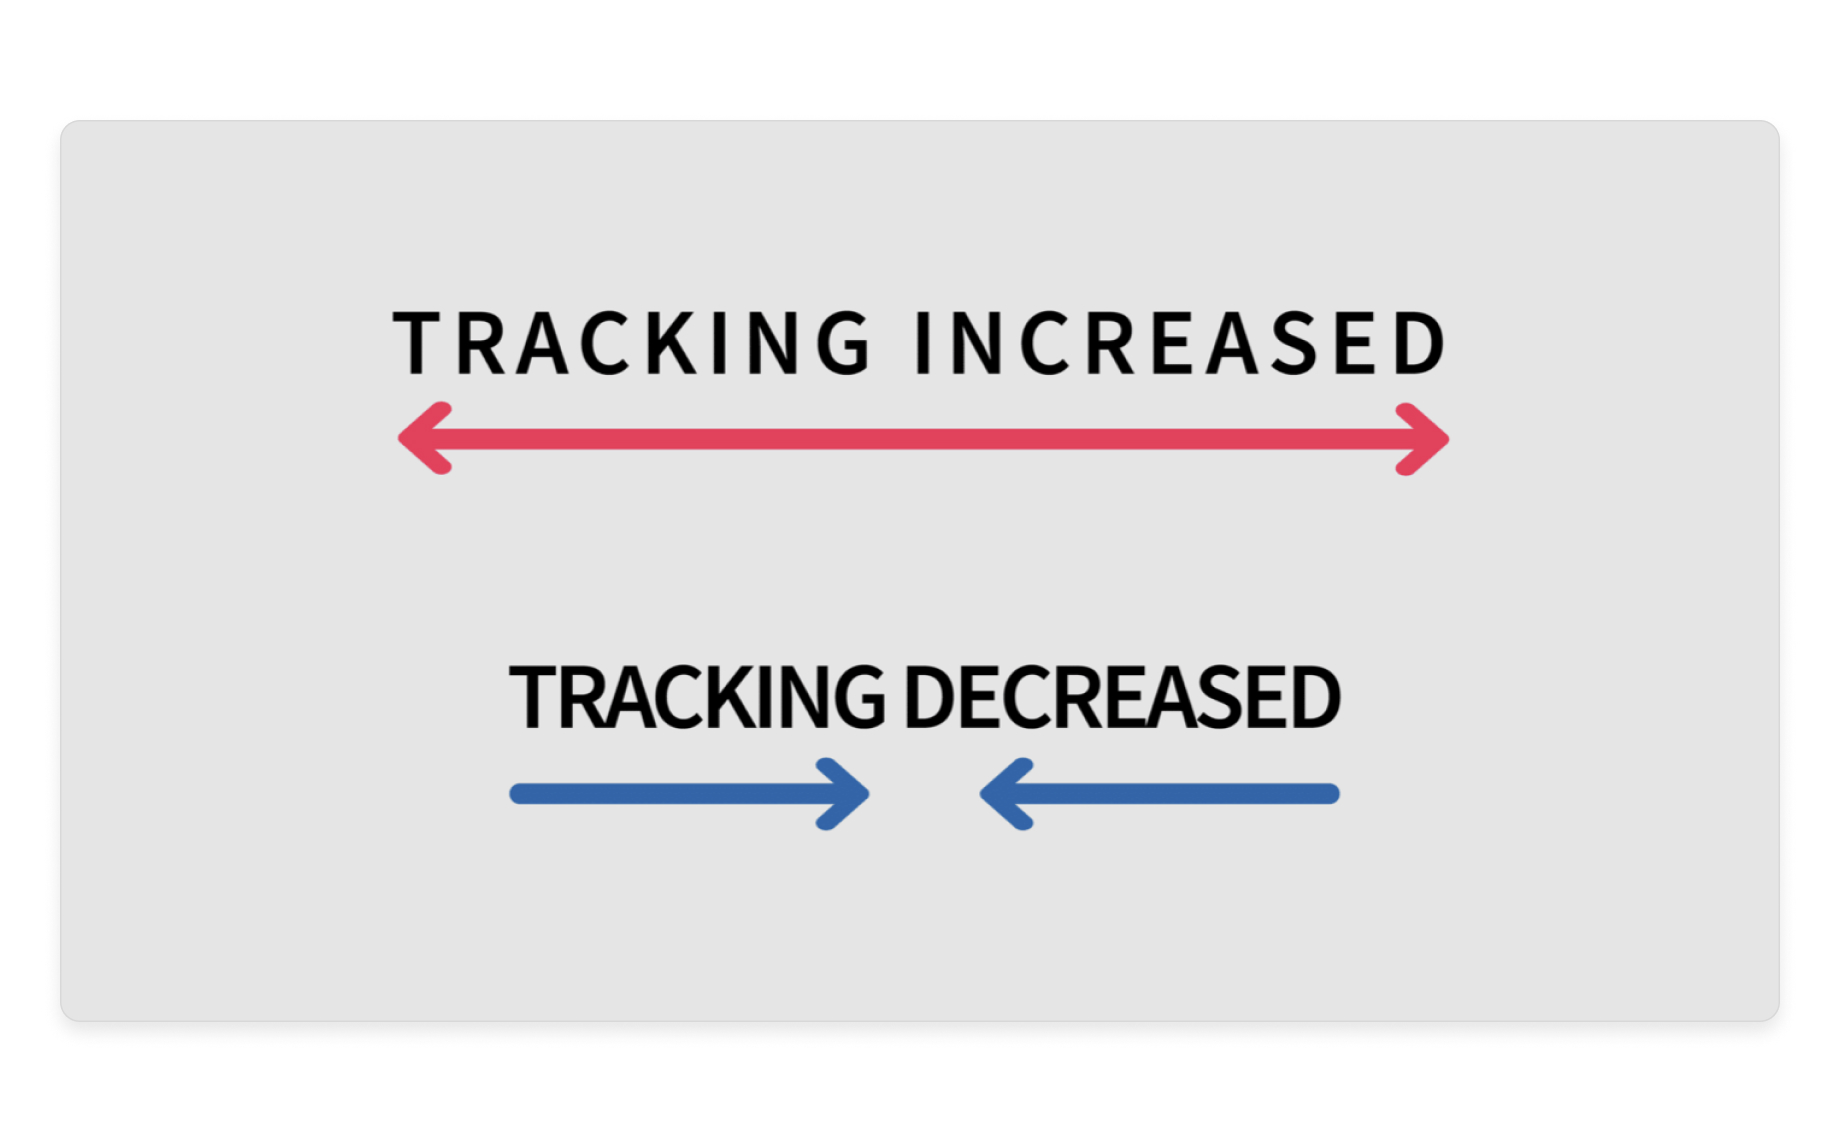 Tracking in typography